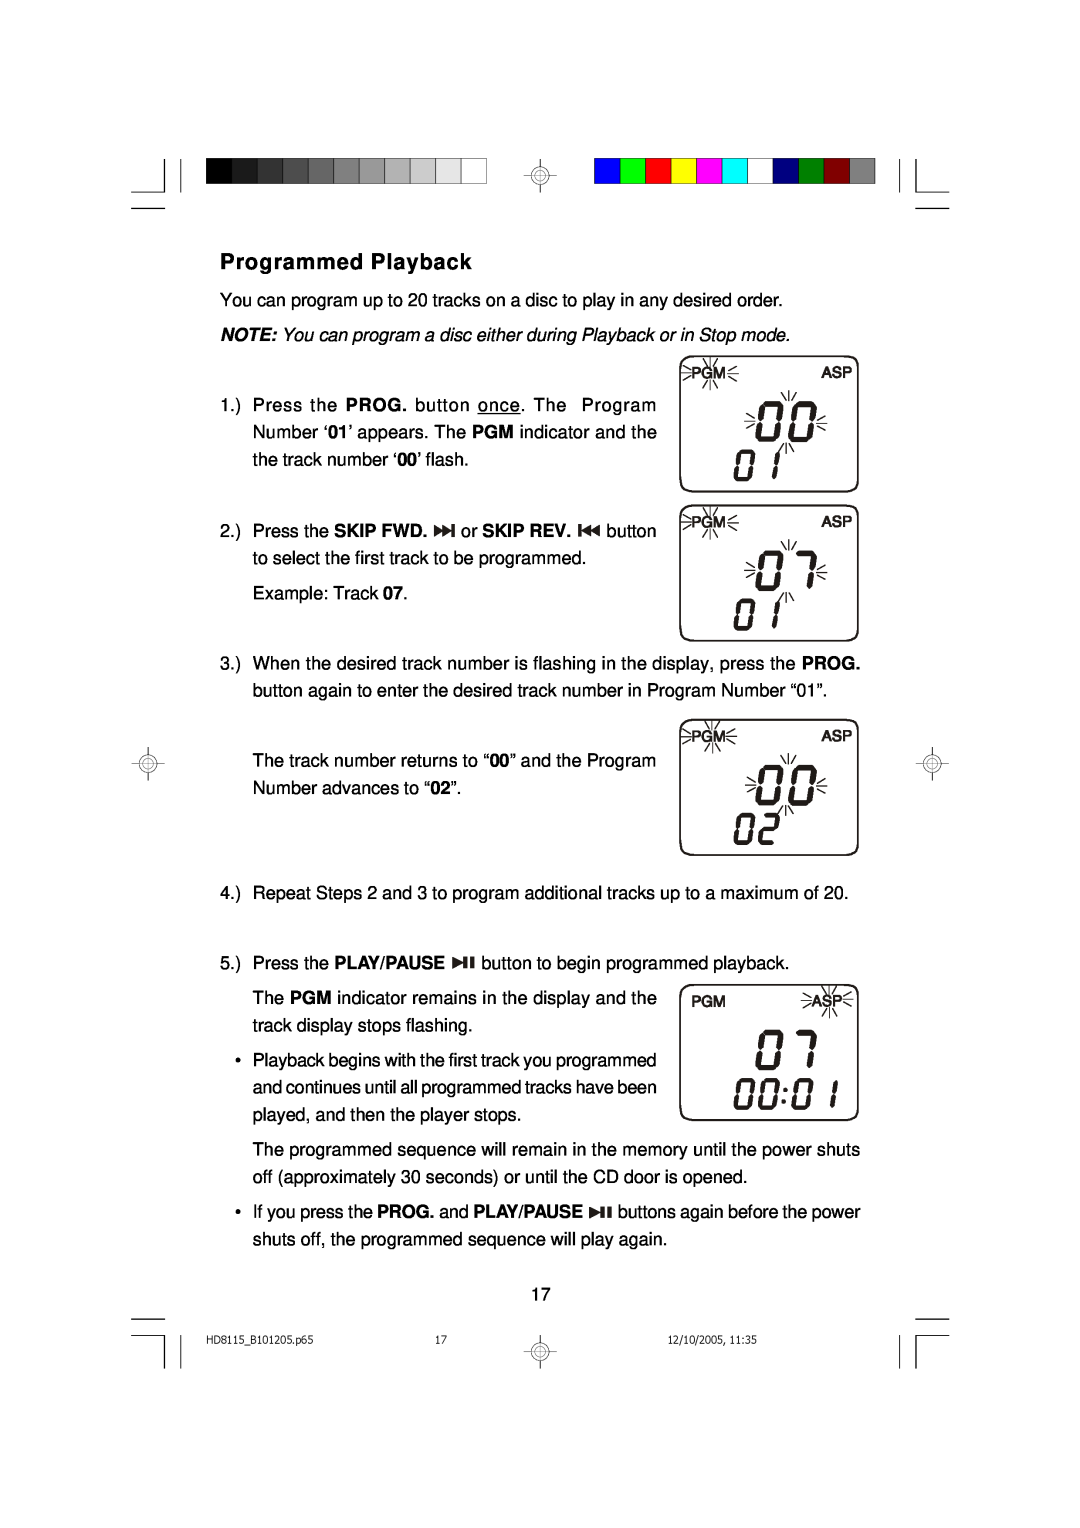 Emerson HD8115 owner manual Programmed Playback 